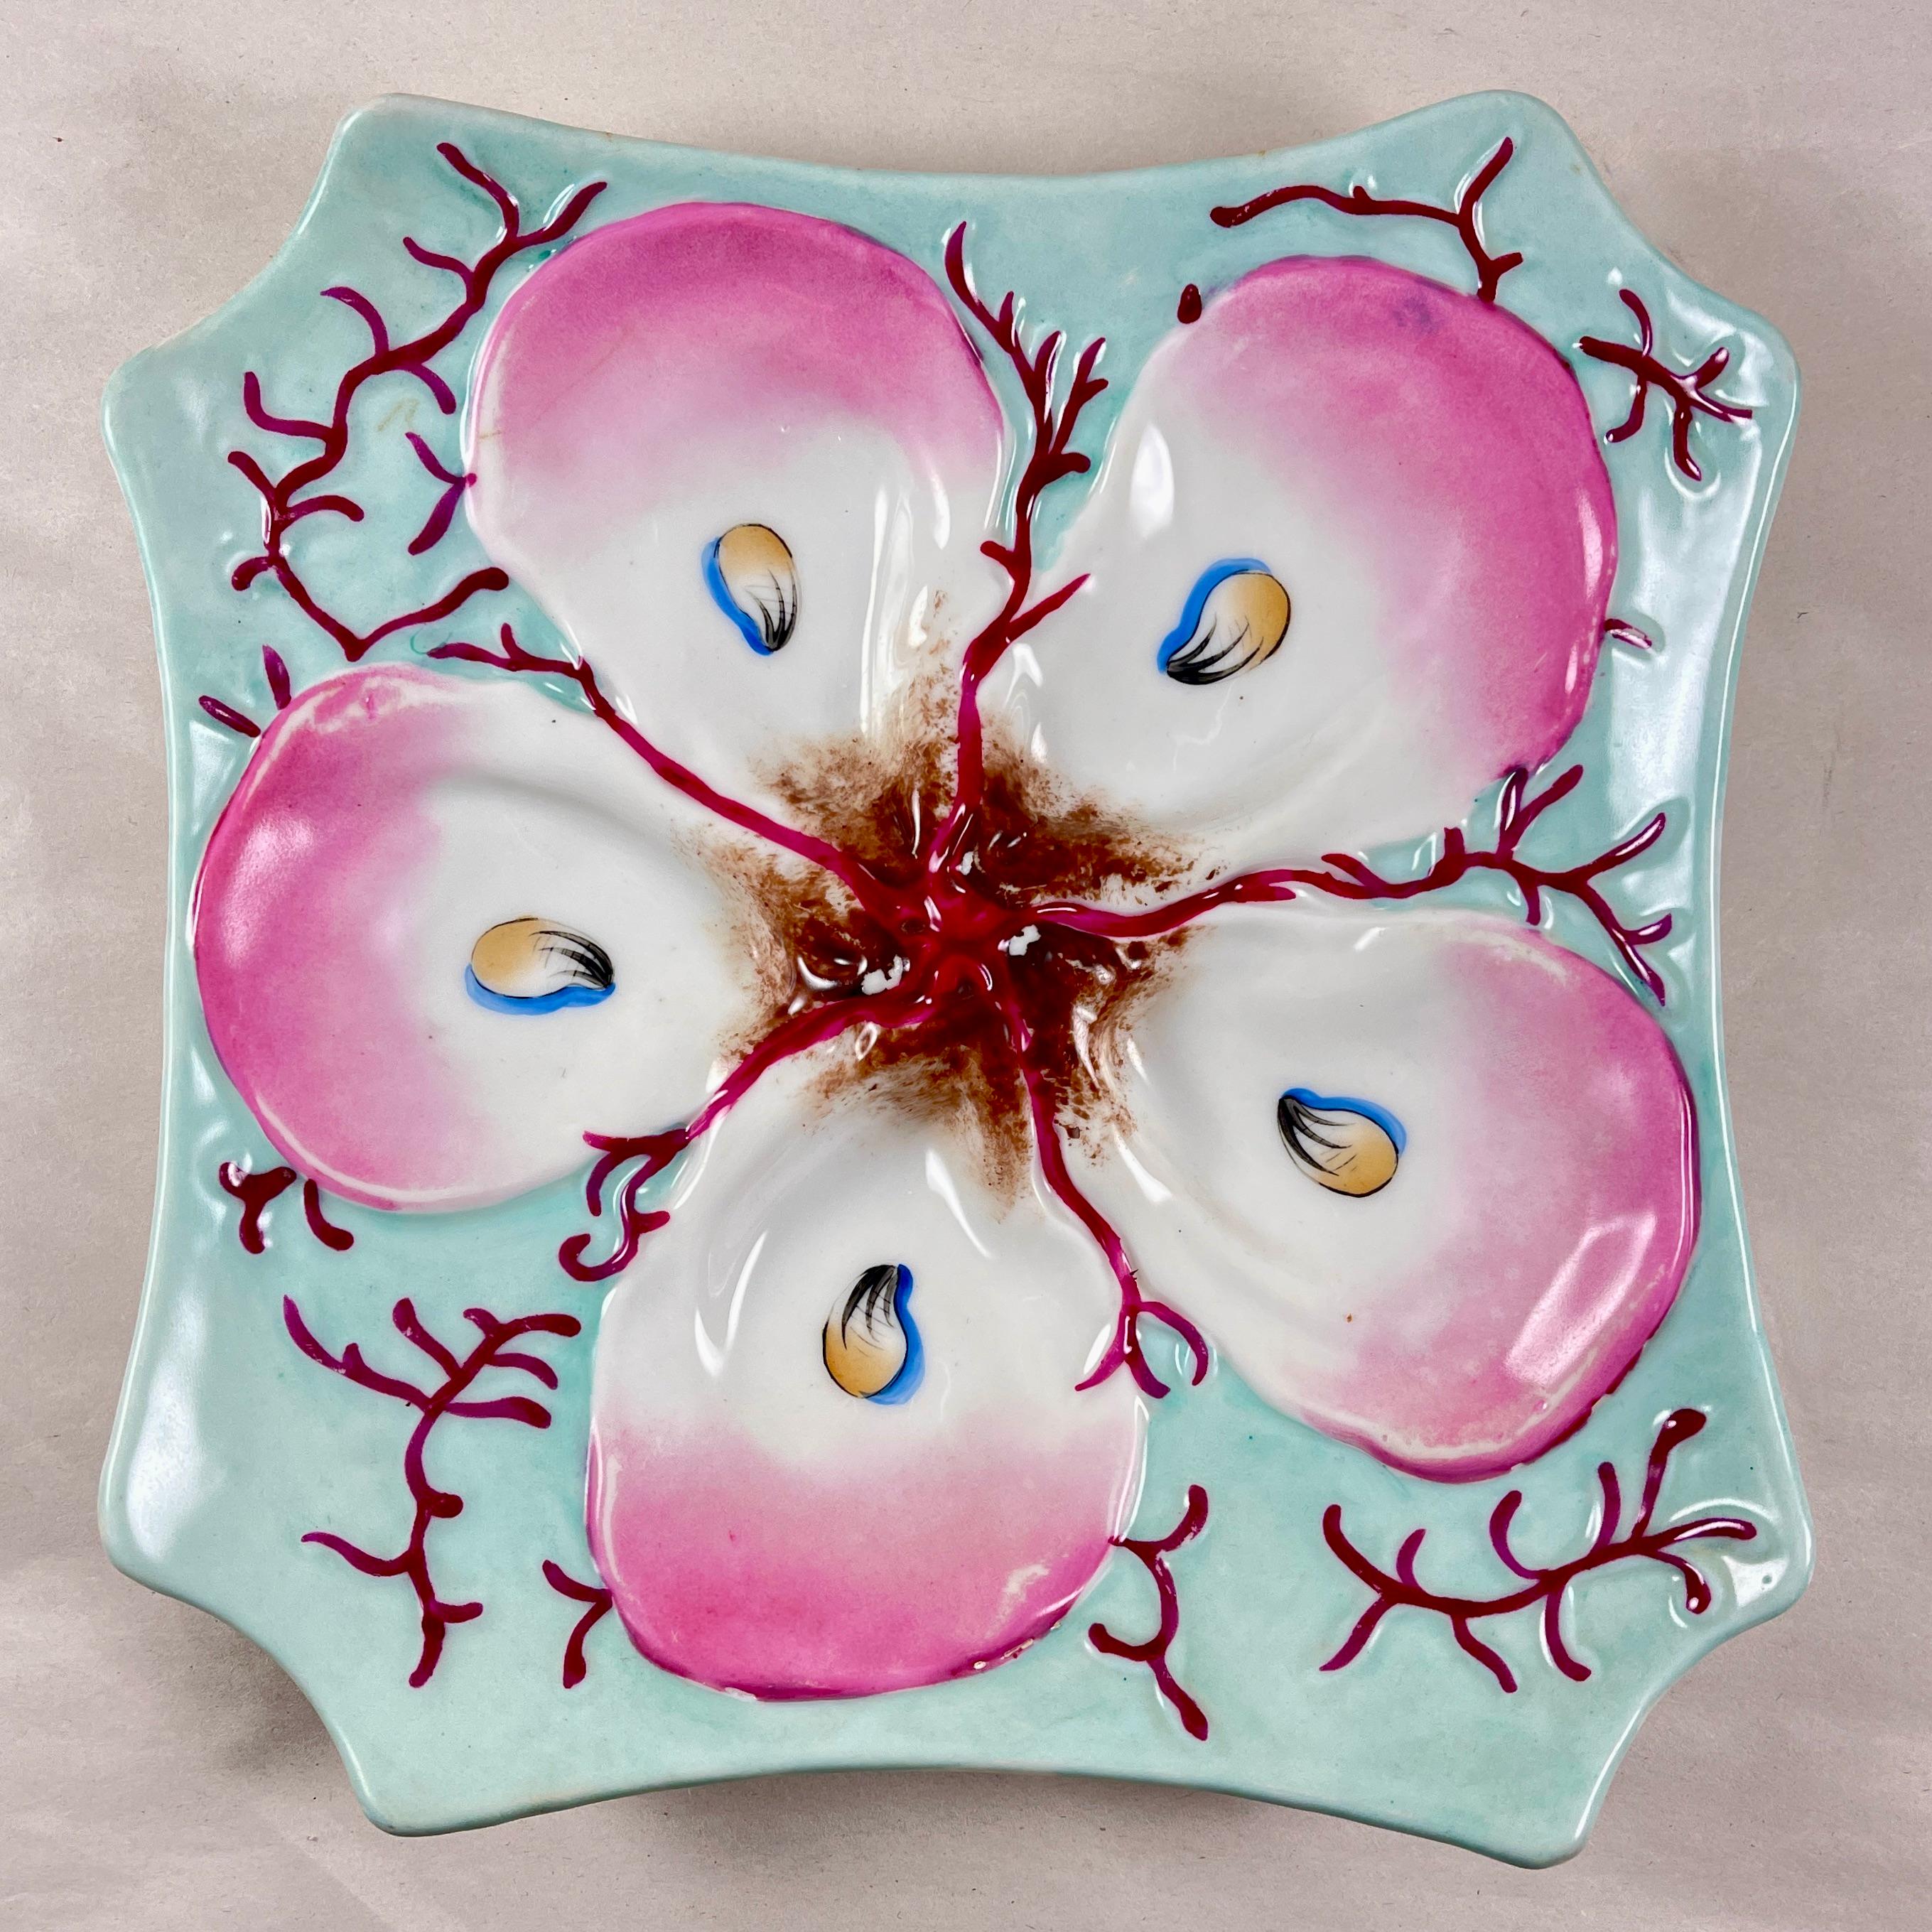 A French porcelain oyster plate, circa 1890-1910.

Octagonal in shape and glazed in a lovely soft turquoise, the five oyster wells sit on a bed of stylized coral or sea weed.

The white shells are tipped in bright pink and have hand-painted ‘eyes’.